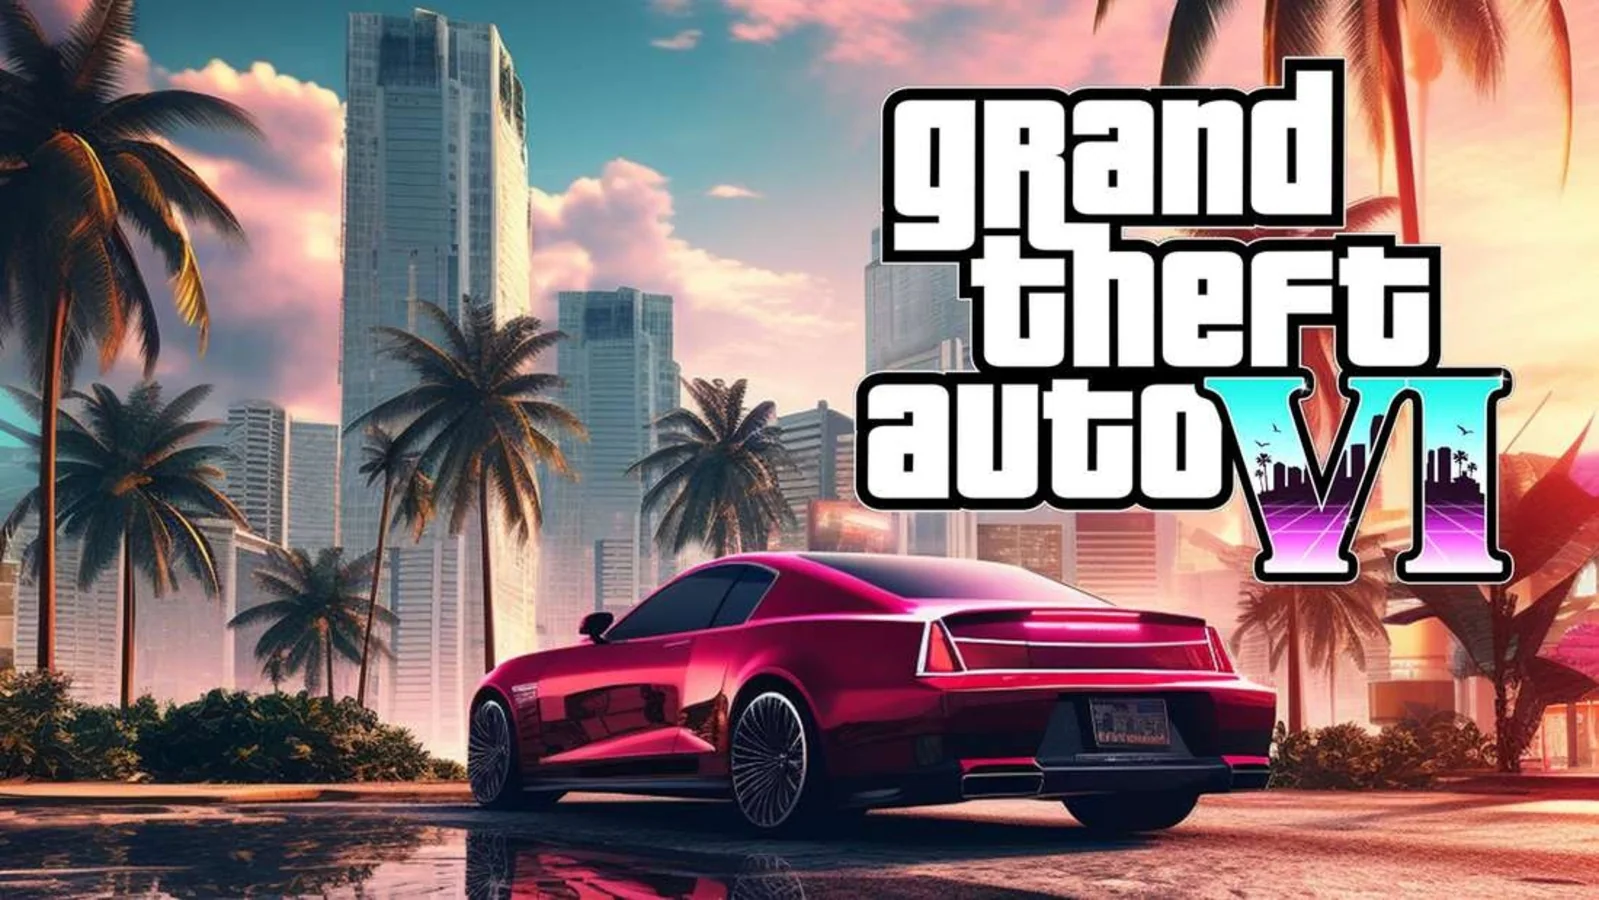 New GTA 6 Trailer Breakdown Exciting Features and Release Date Revealed for Gaming Fans--